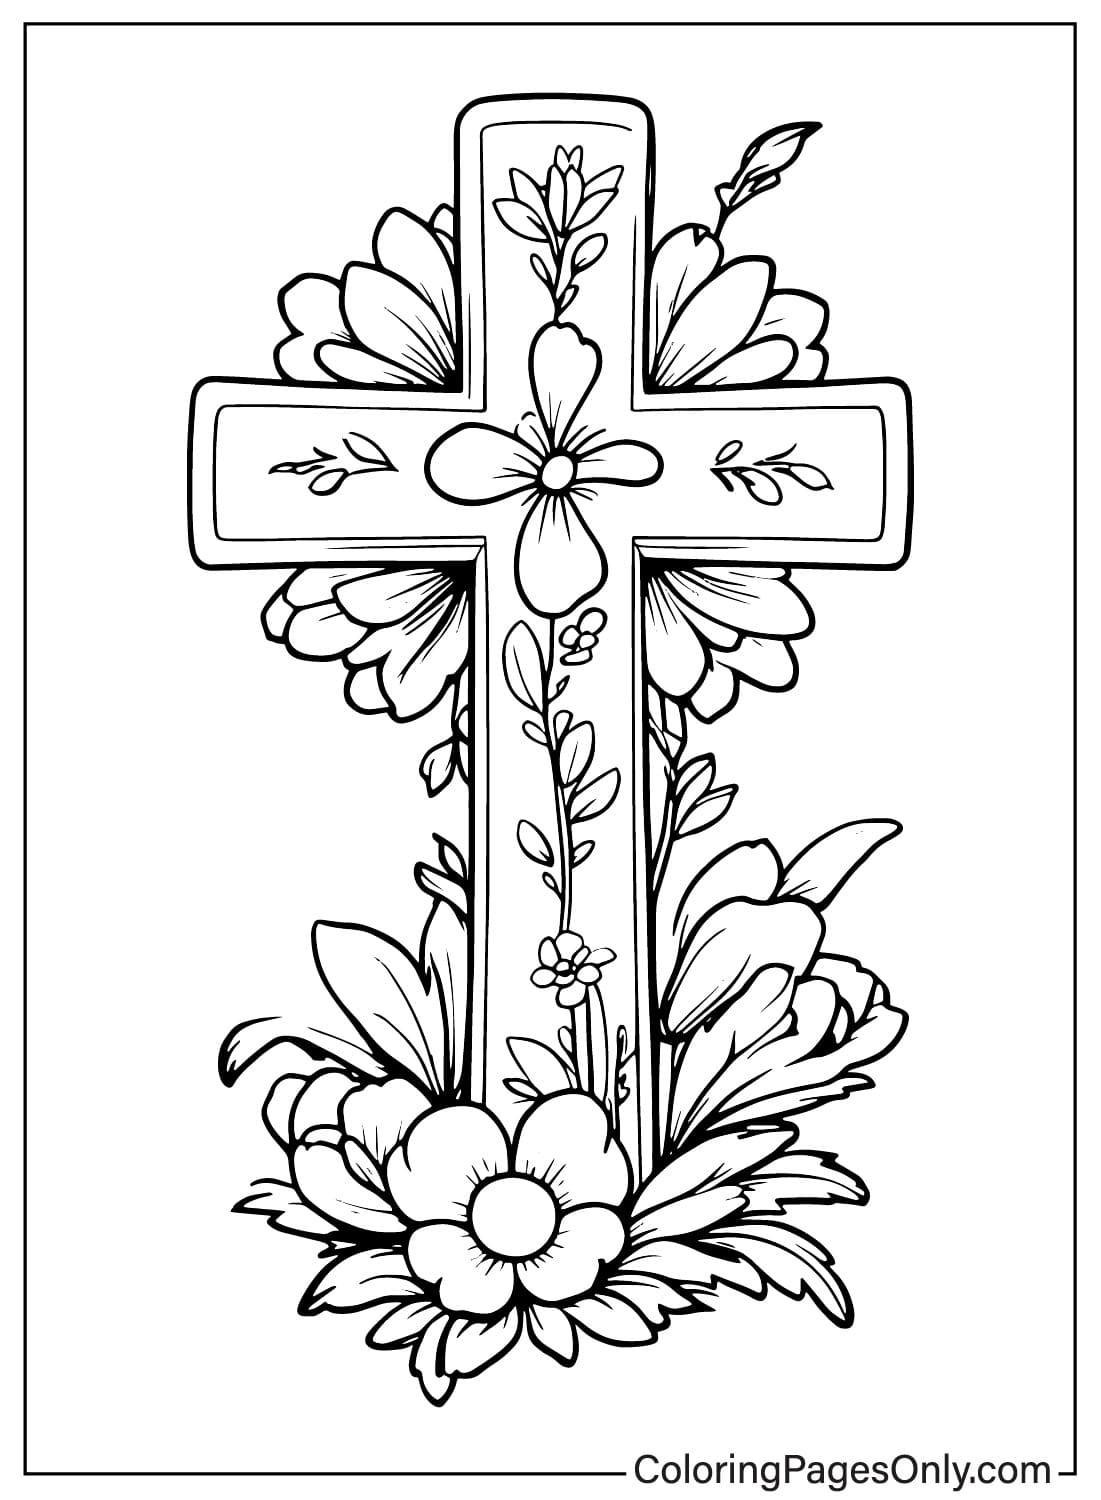 Easter Cross Free Coloring Page - Free Printable Coloring Pages